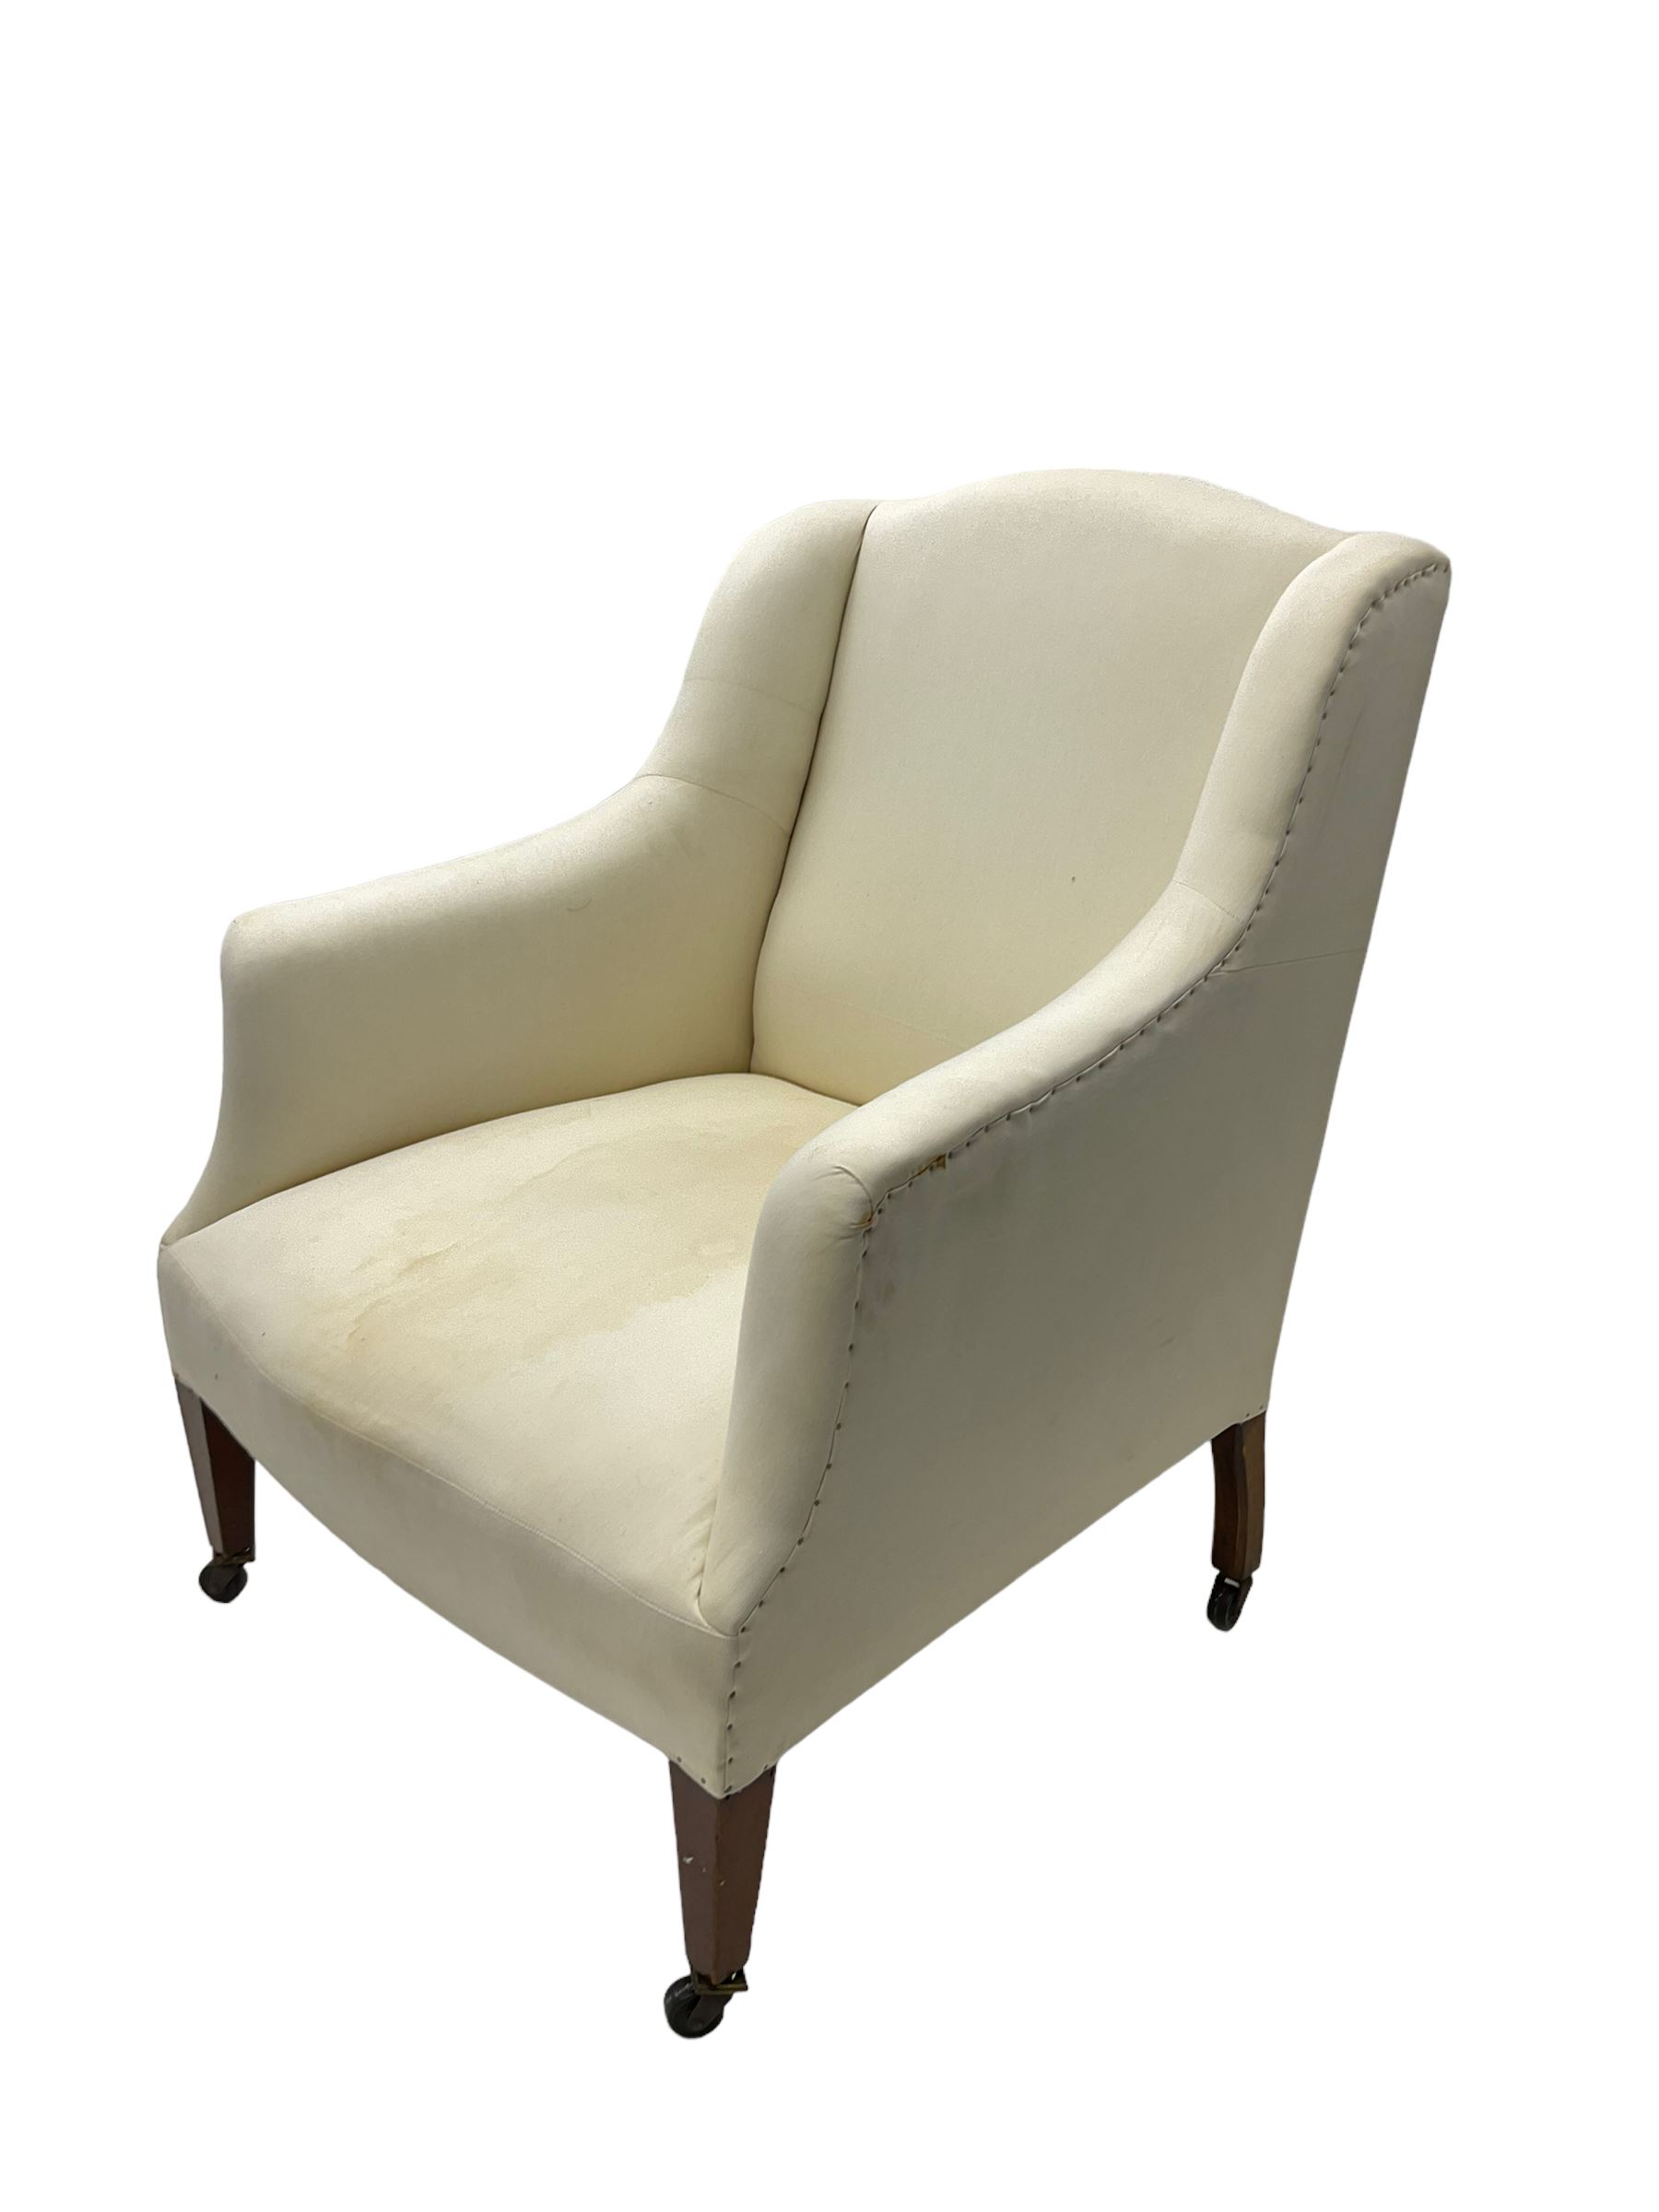 Edwardian wingback armchair - Image 3 of 5